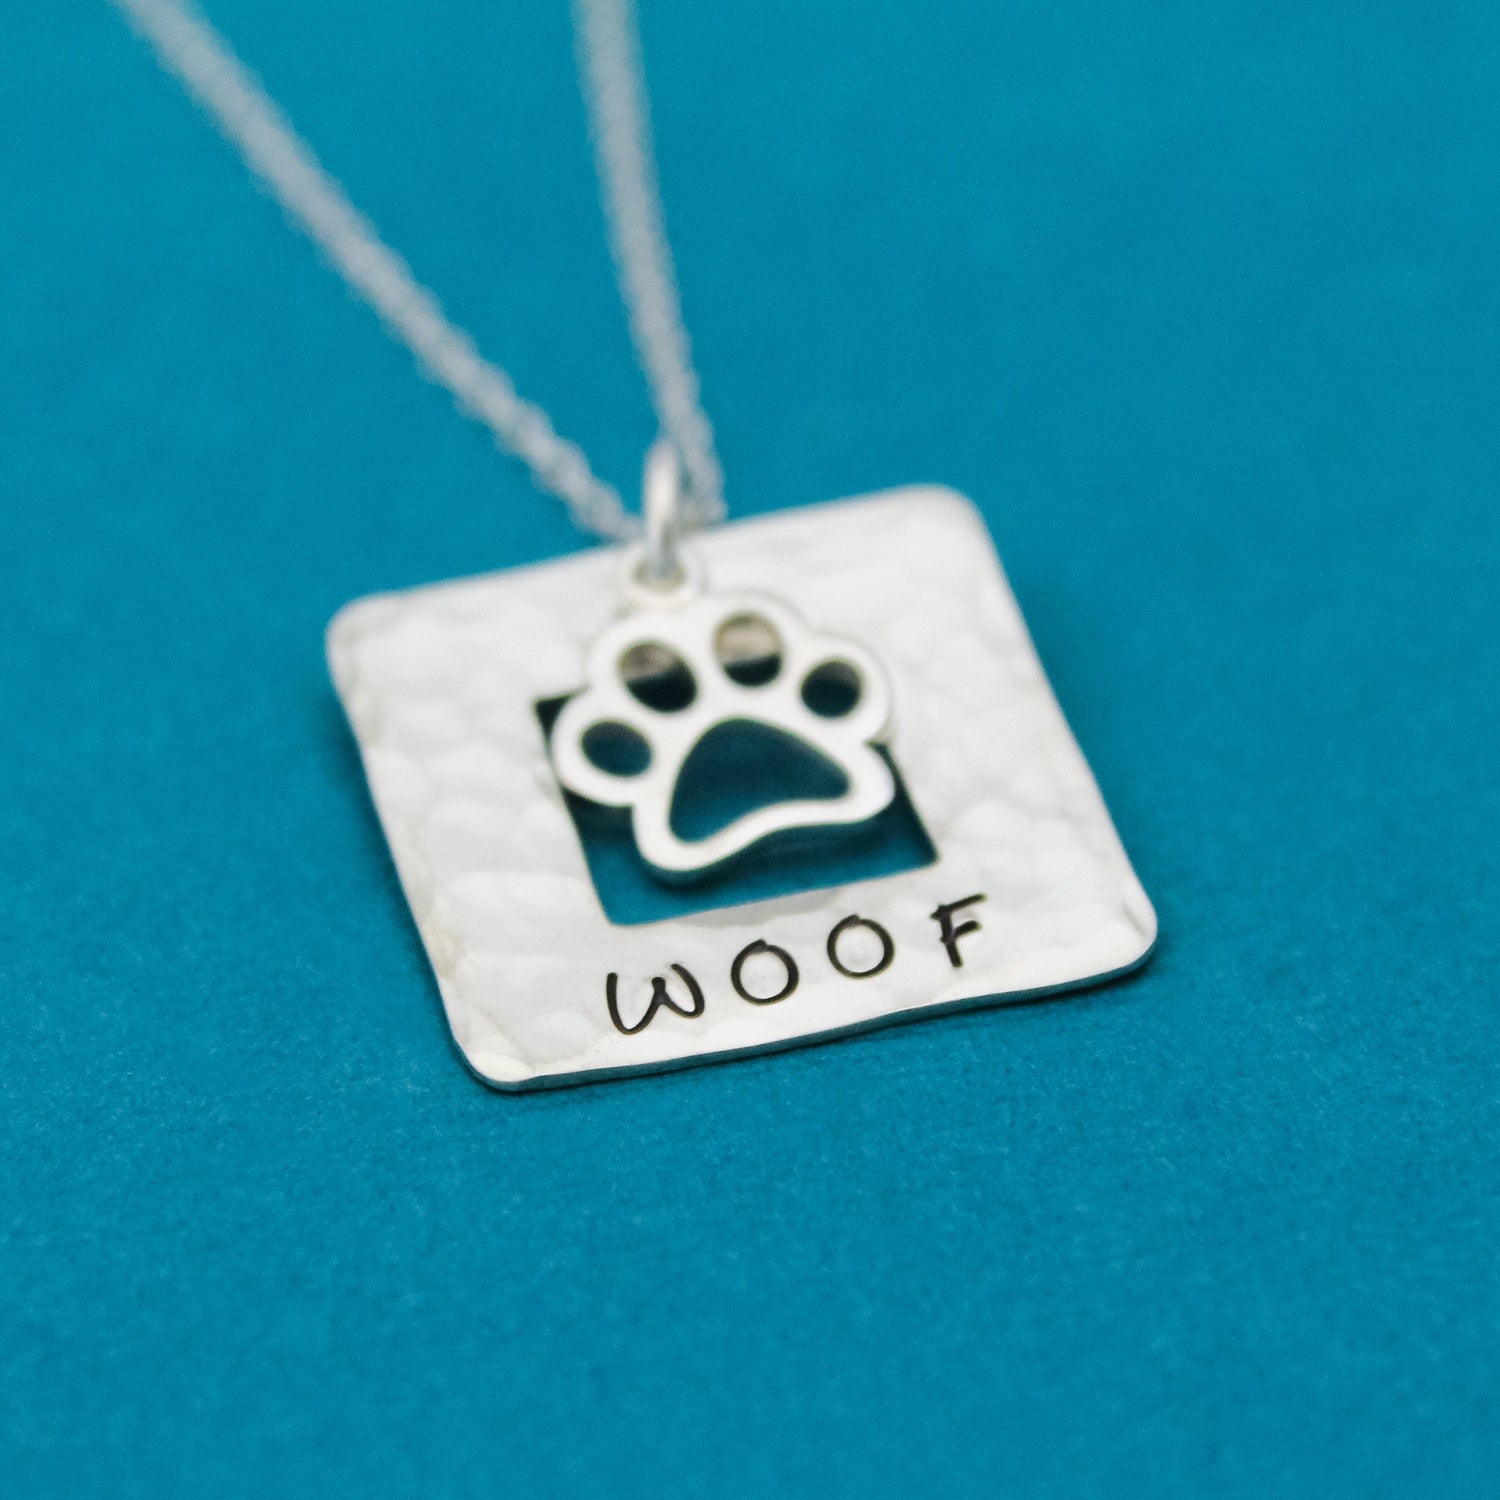 WOOF Necklace, Sterling Silver Dog Paw Necklace, Dog Lover Gift, New Pet Gift, Dog Paw Jewelry, Paw Print Necklace, Hand Stamped Jewelry